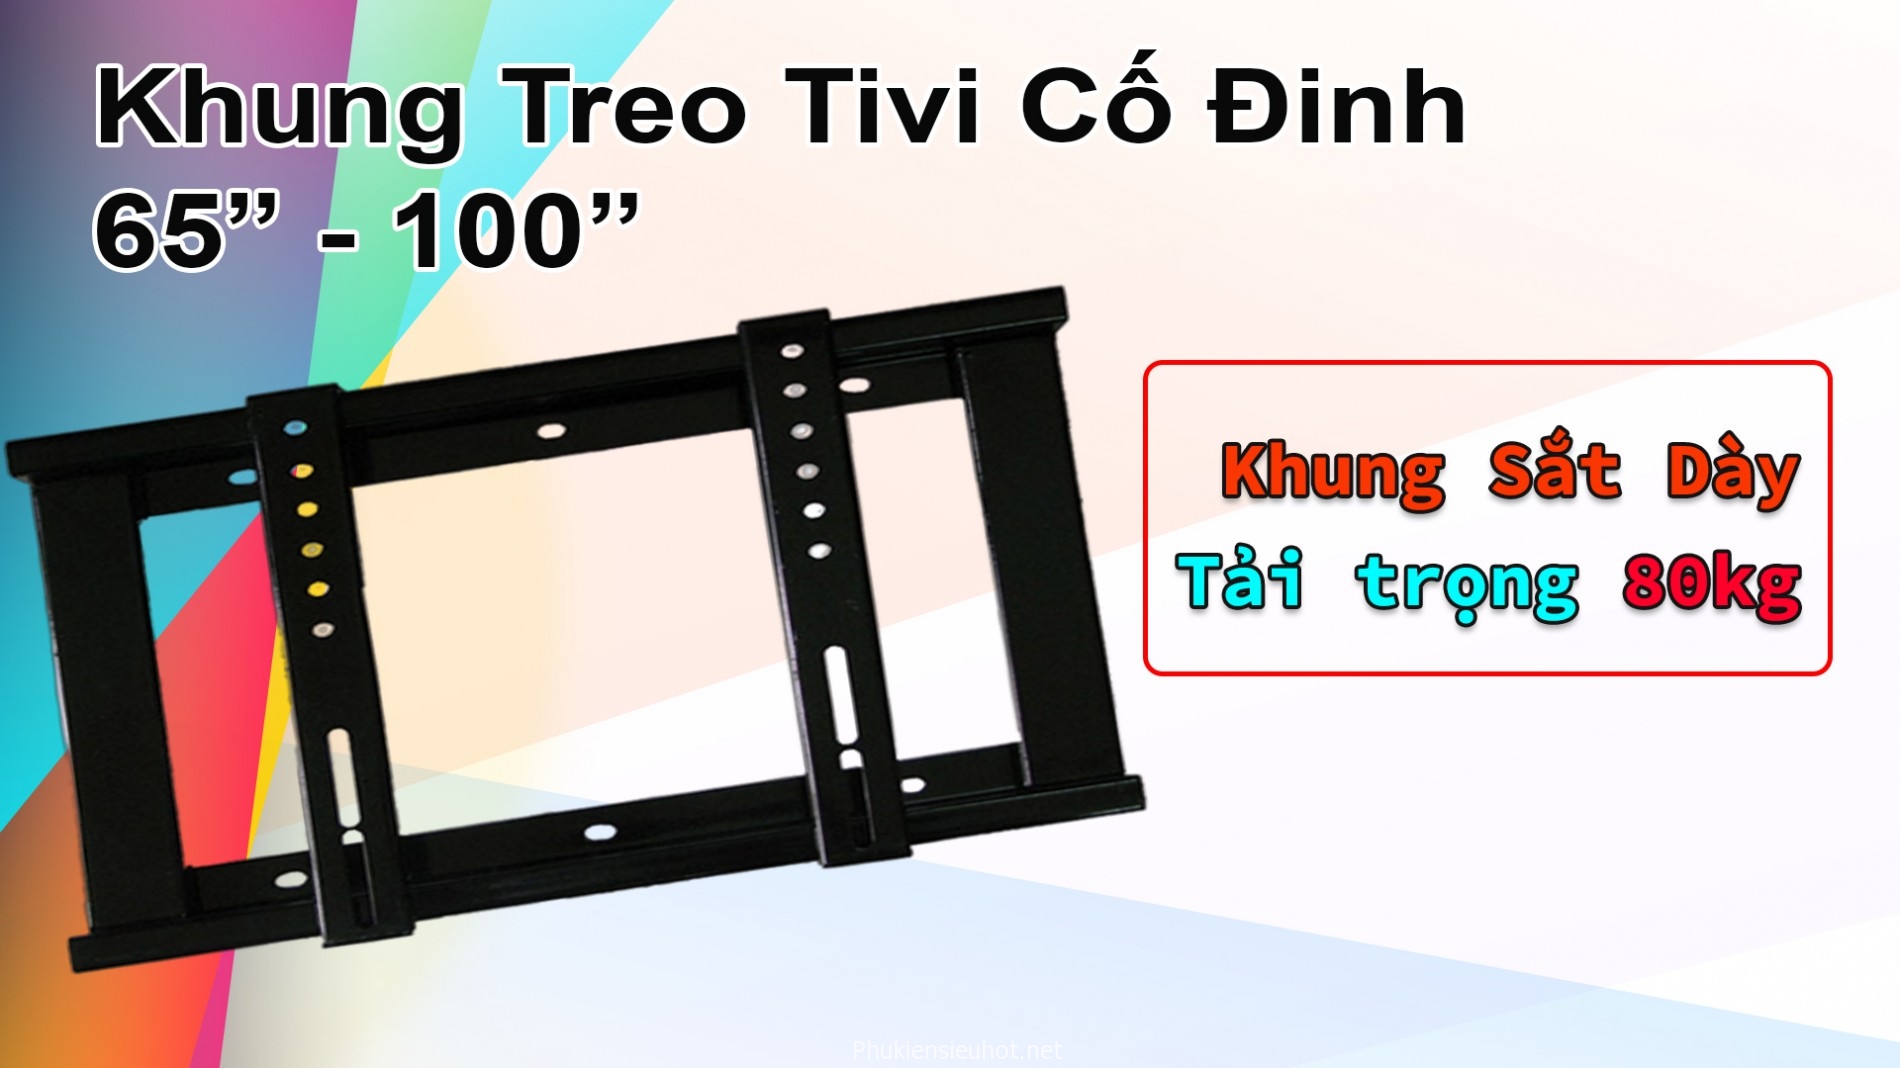 khung-treo-tivi-co-dinh-ap-tuong-tv-65-100inch-vn